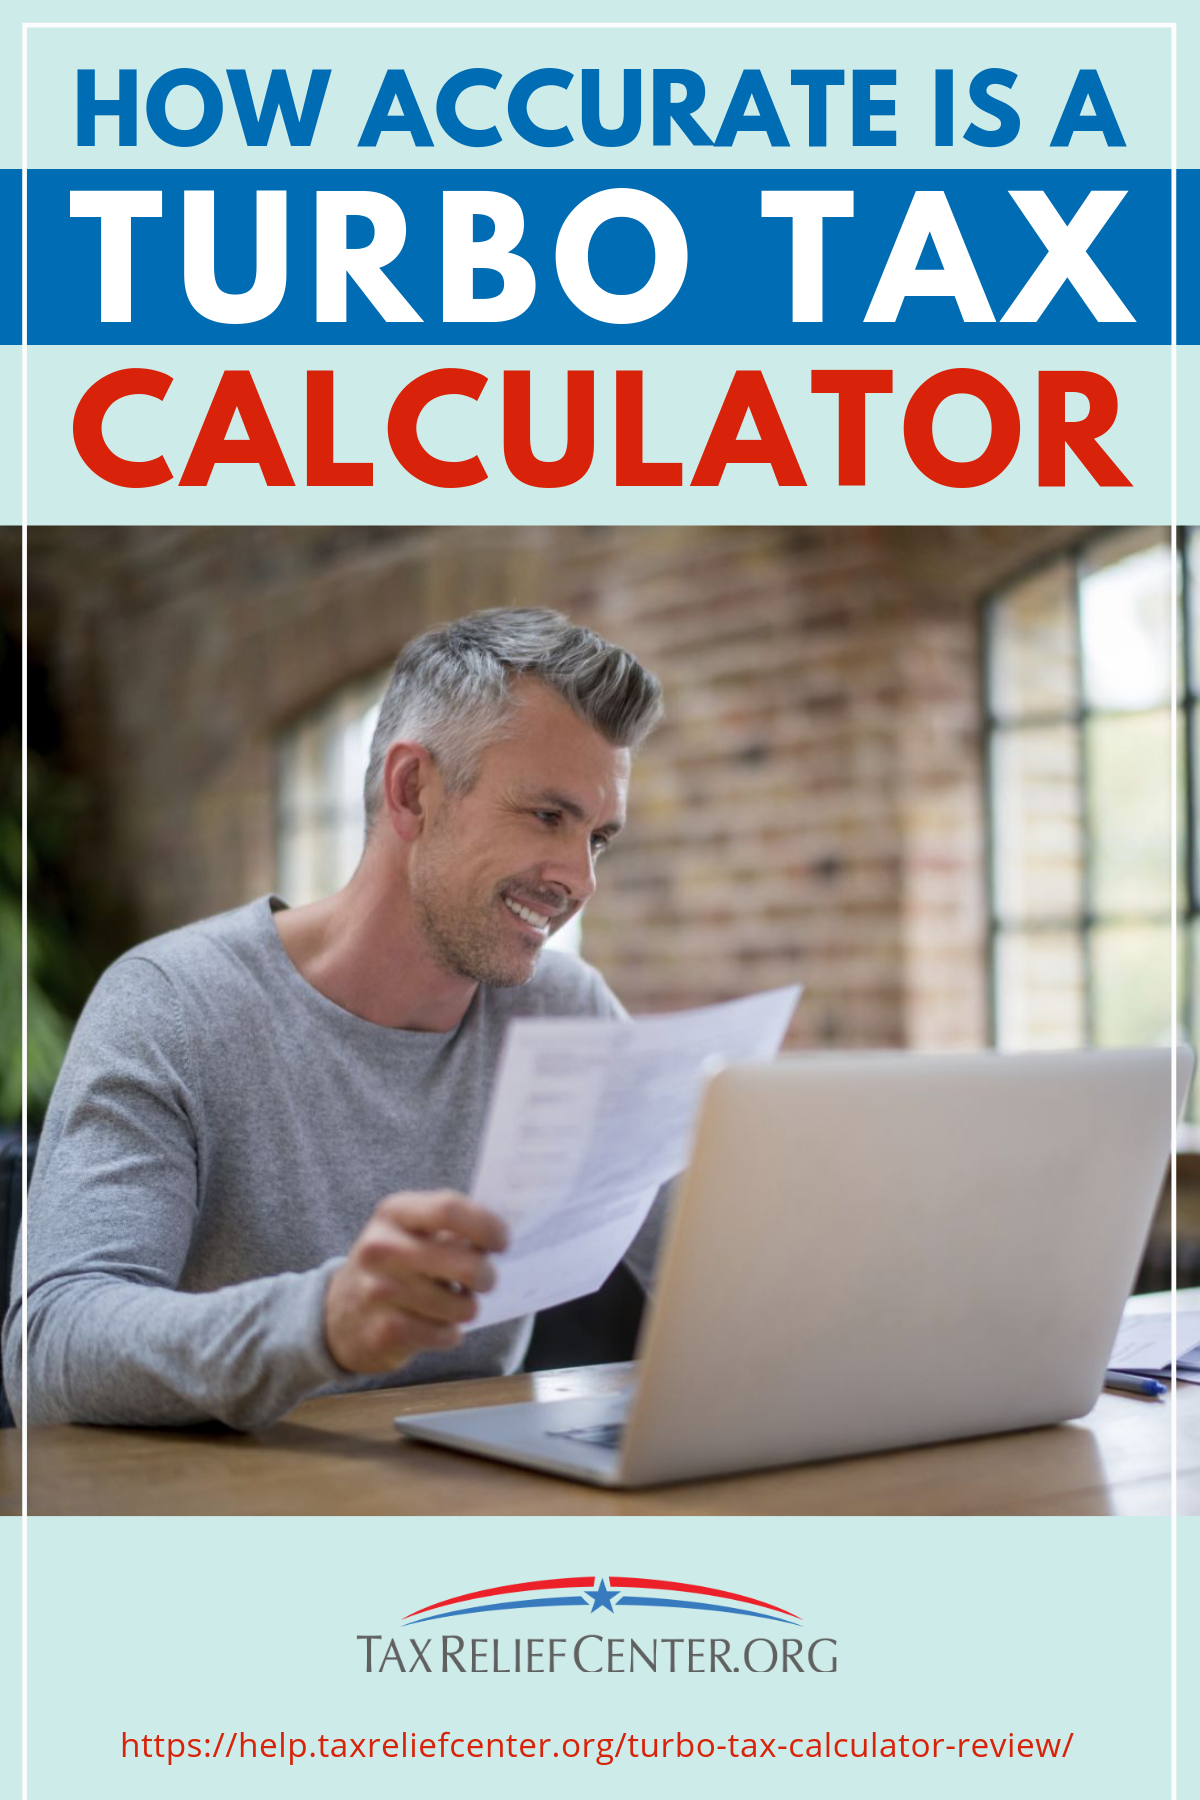 How Accurate Is Turbo Tax Calculator? https://help.taxreliefcenter.org/turbo-tax-calculator-review/